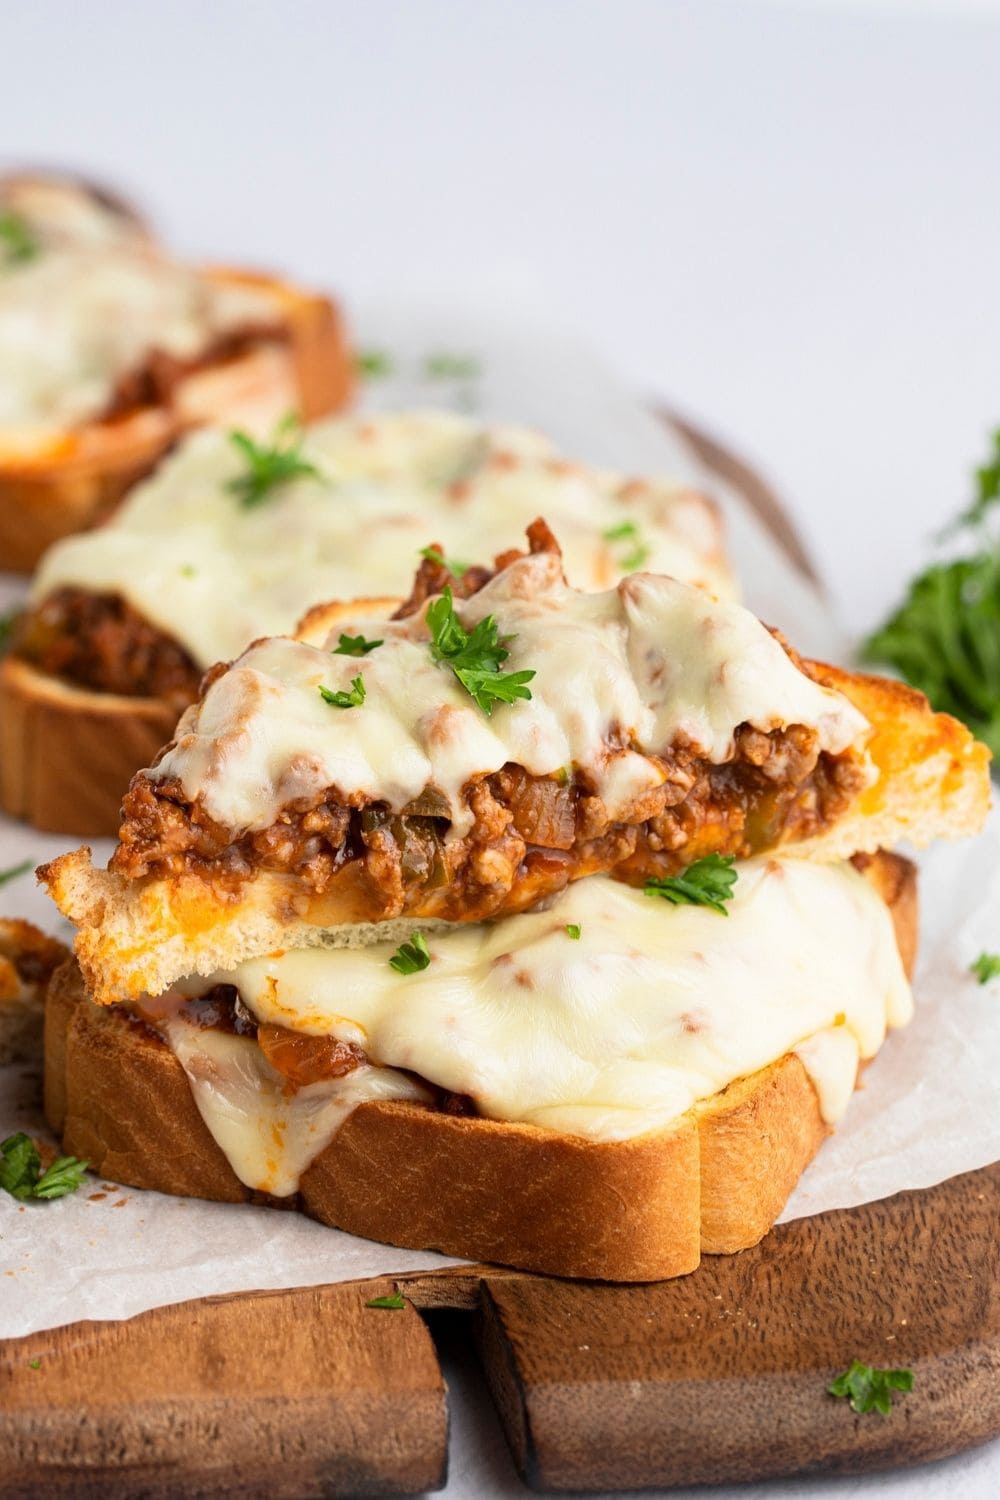 Open-faced sandwiches with saucy ground beef filling with onion and bell peppers topped with American cheese served on a wooden cutting board with parchment paper